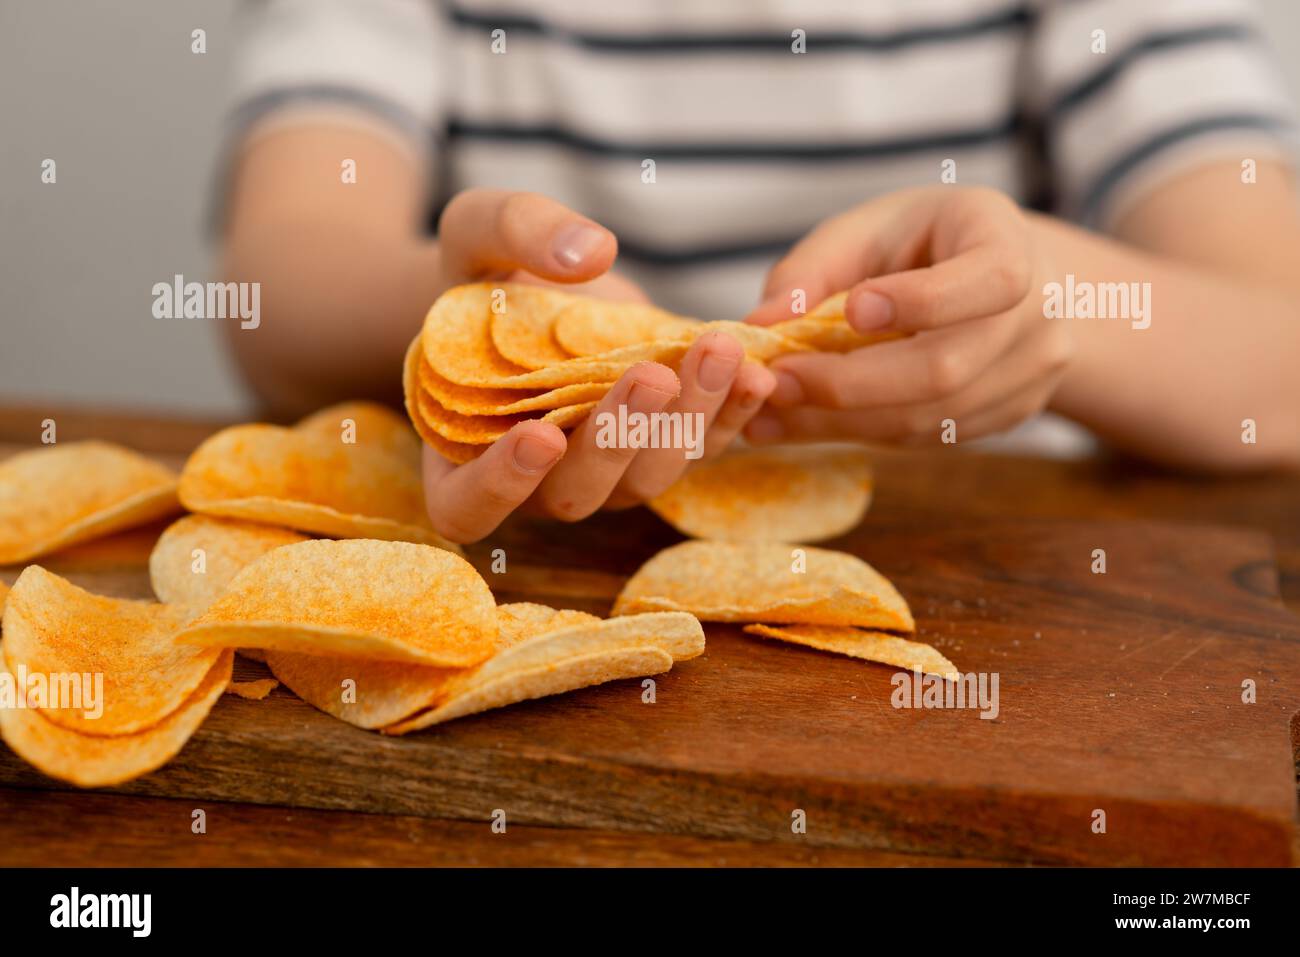 A child's hands engaging with potato chips, stacking them on a wooden table for a playful snack time. Stock Photo